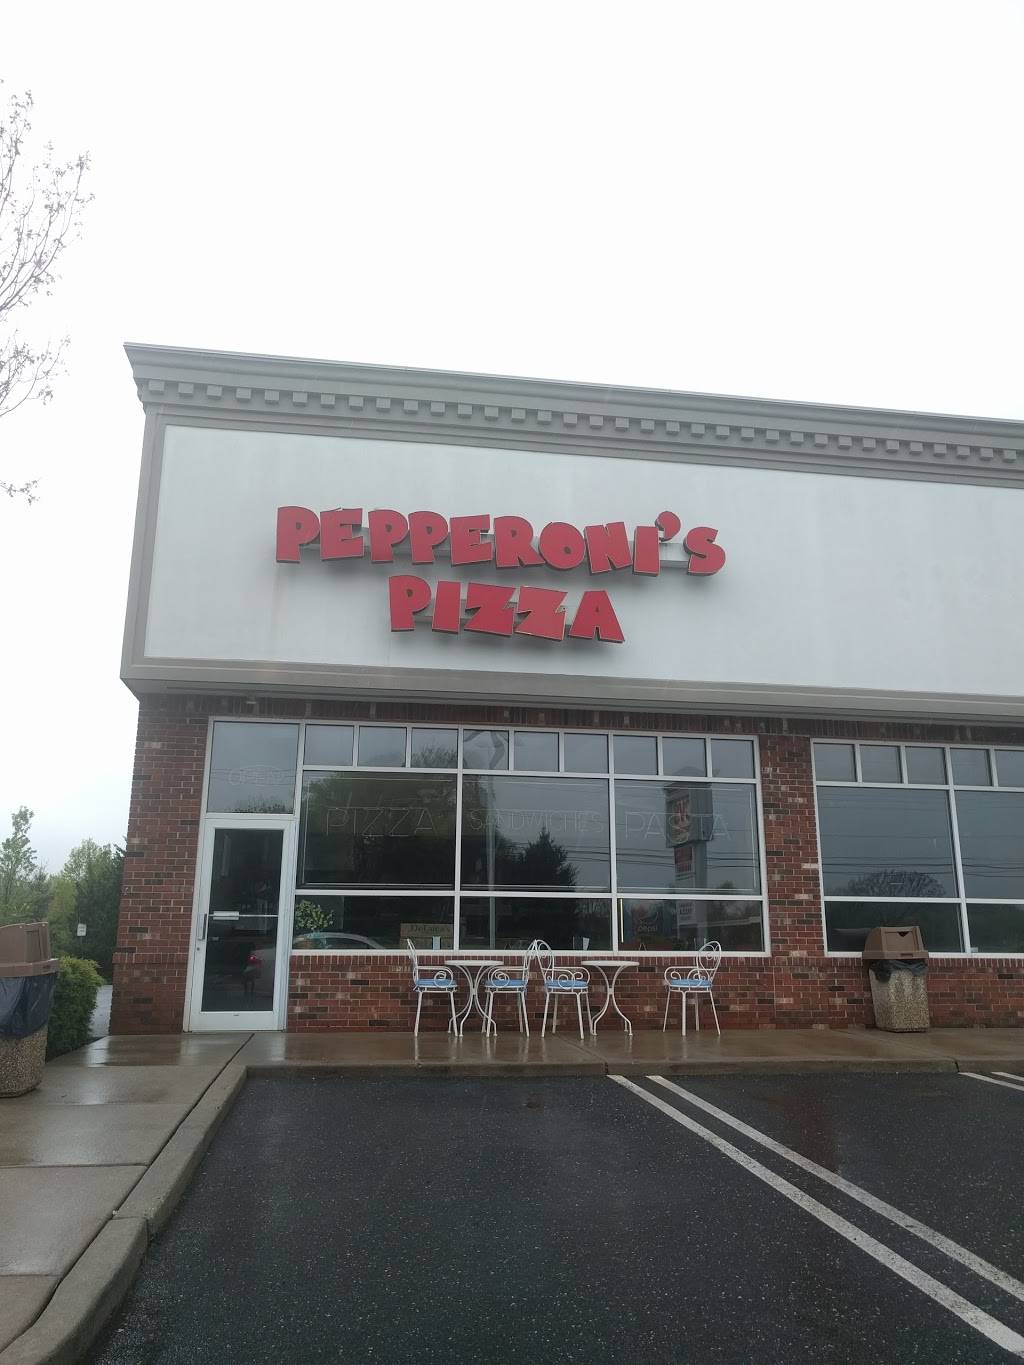 Pepperonis Pizza | meal delivery | 71 Springside Rd, Westampton, NJ 08060, USA | 6098359800 OR +1 609-835-9800